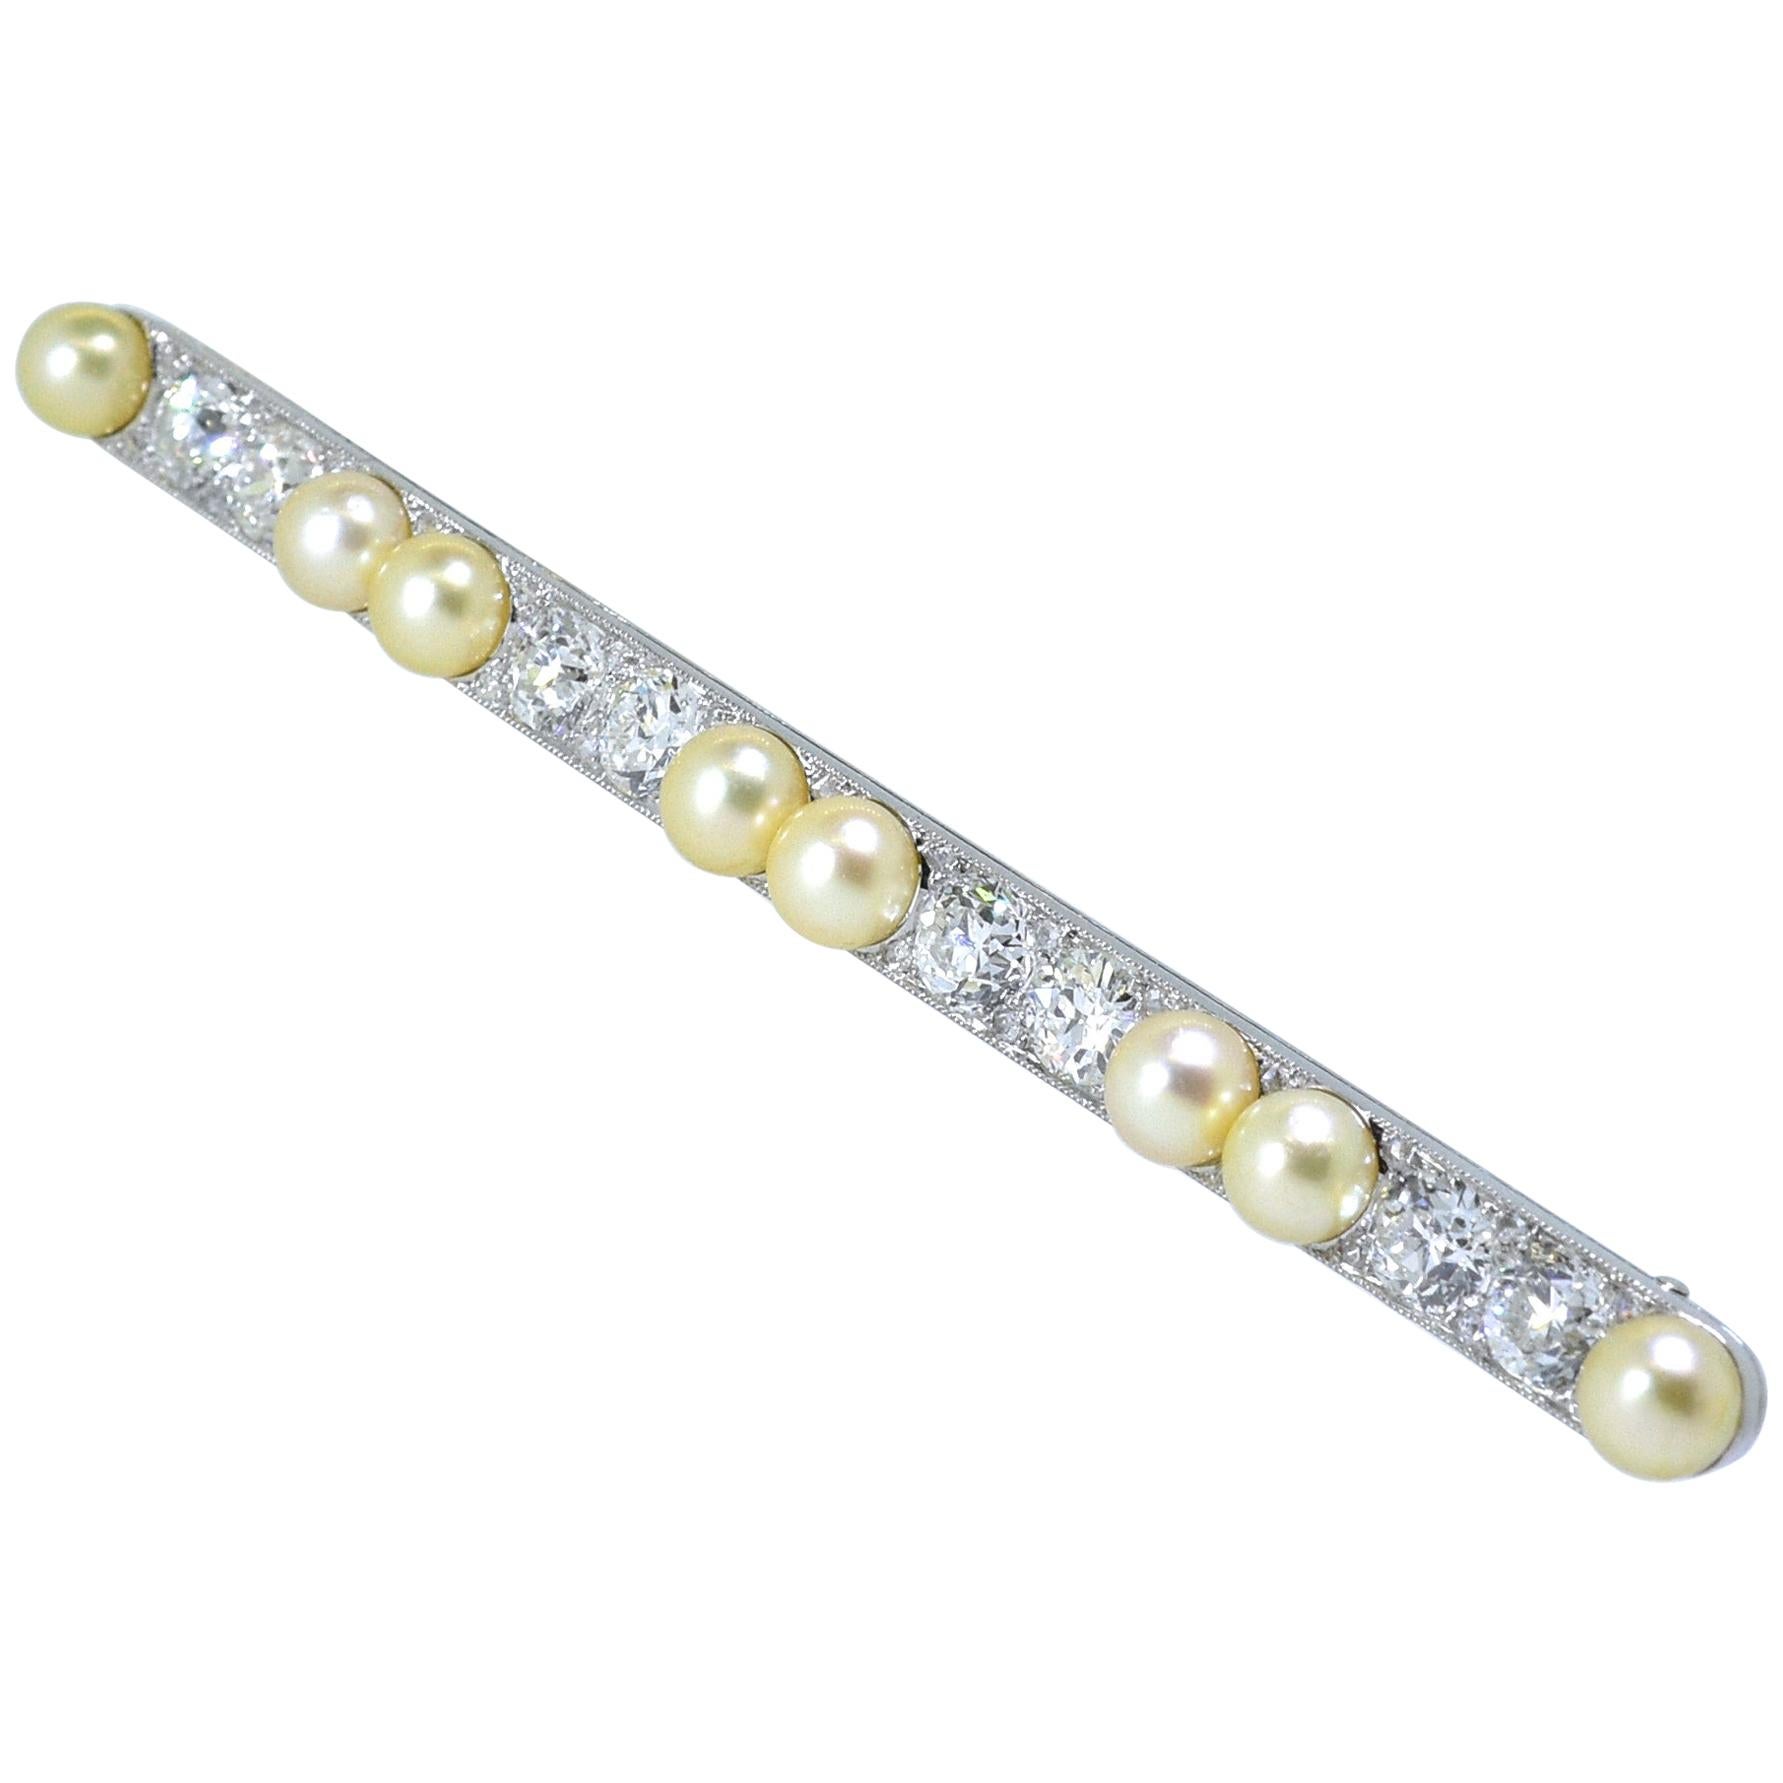 Cartier Brooch with Natural Pearls Diamonds in Platinum, circa 1915